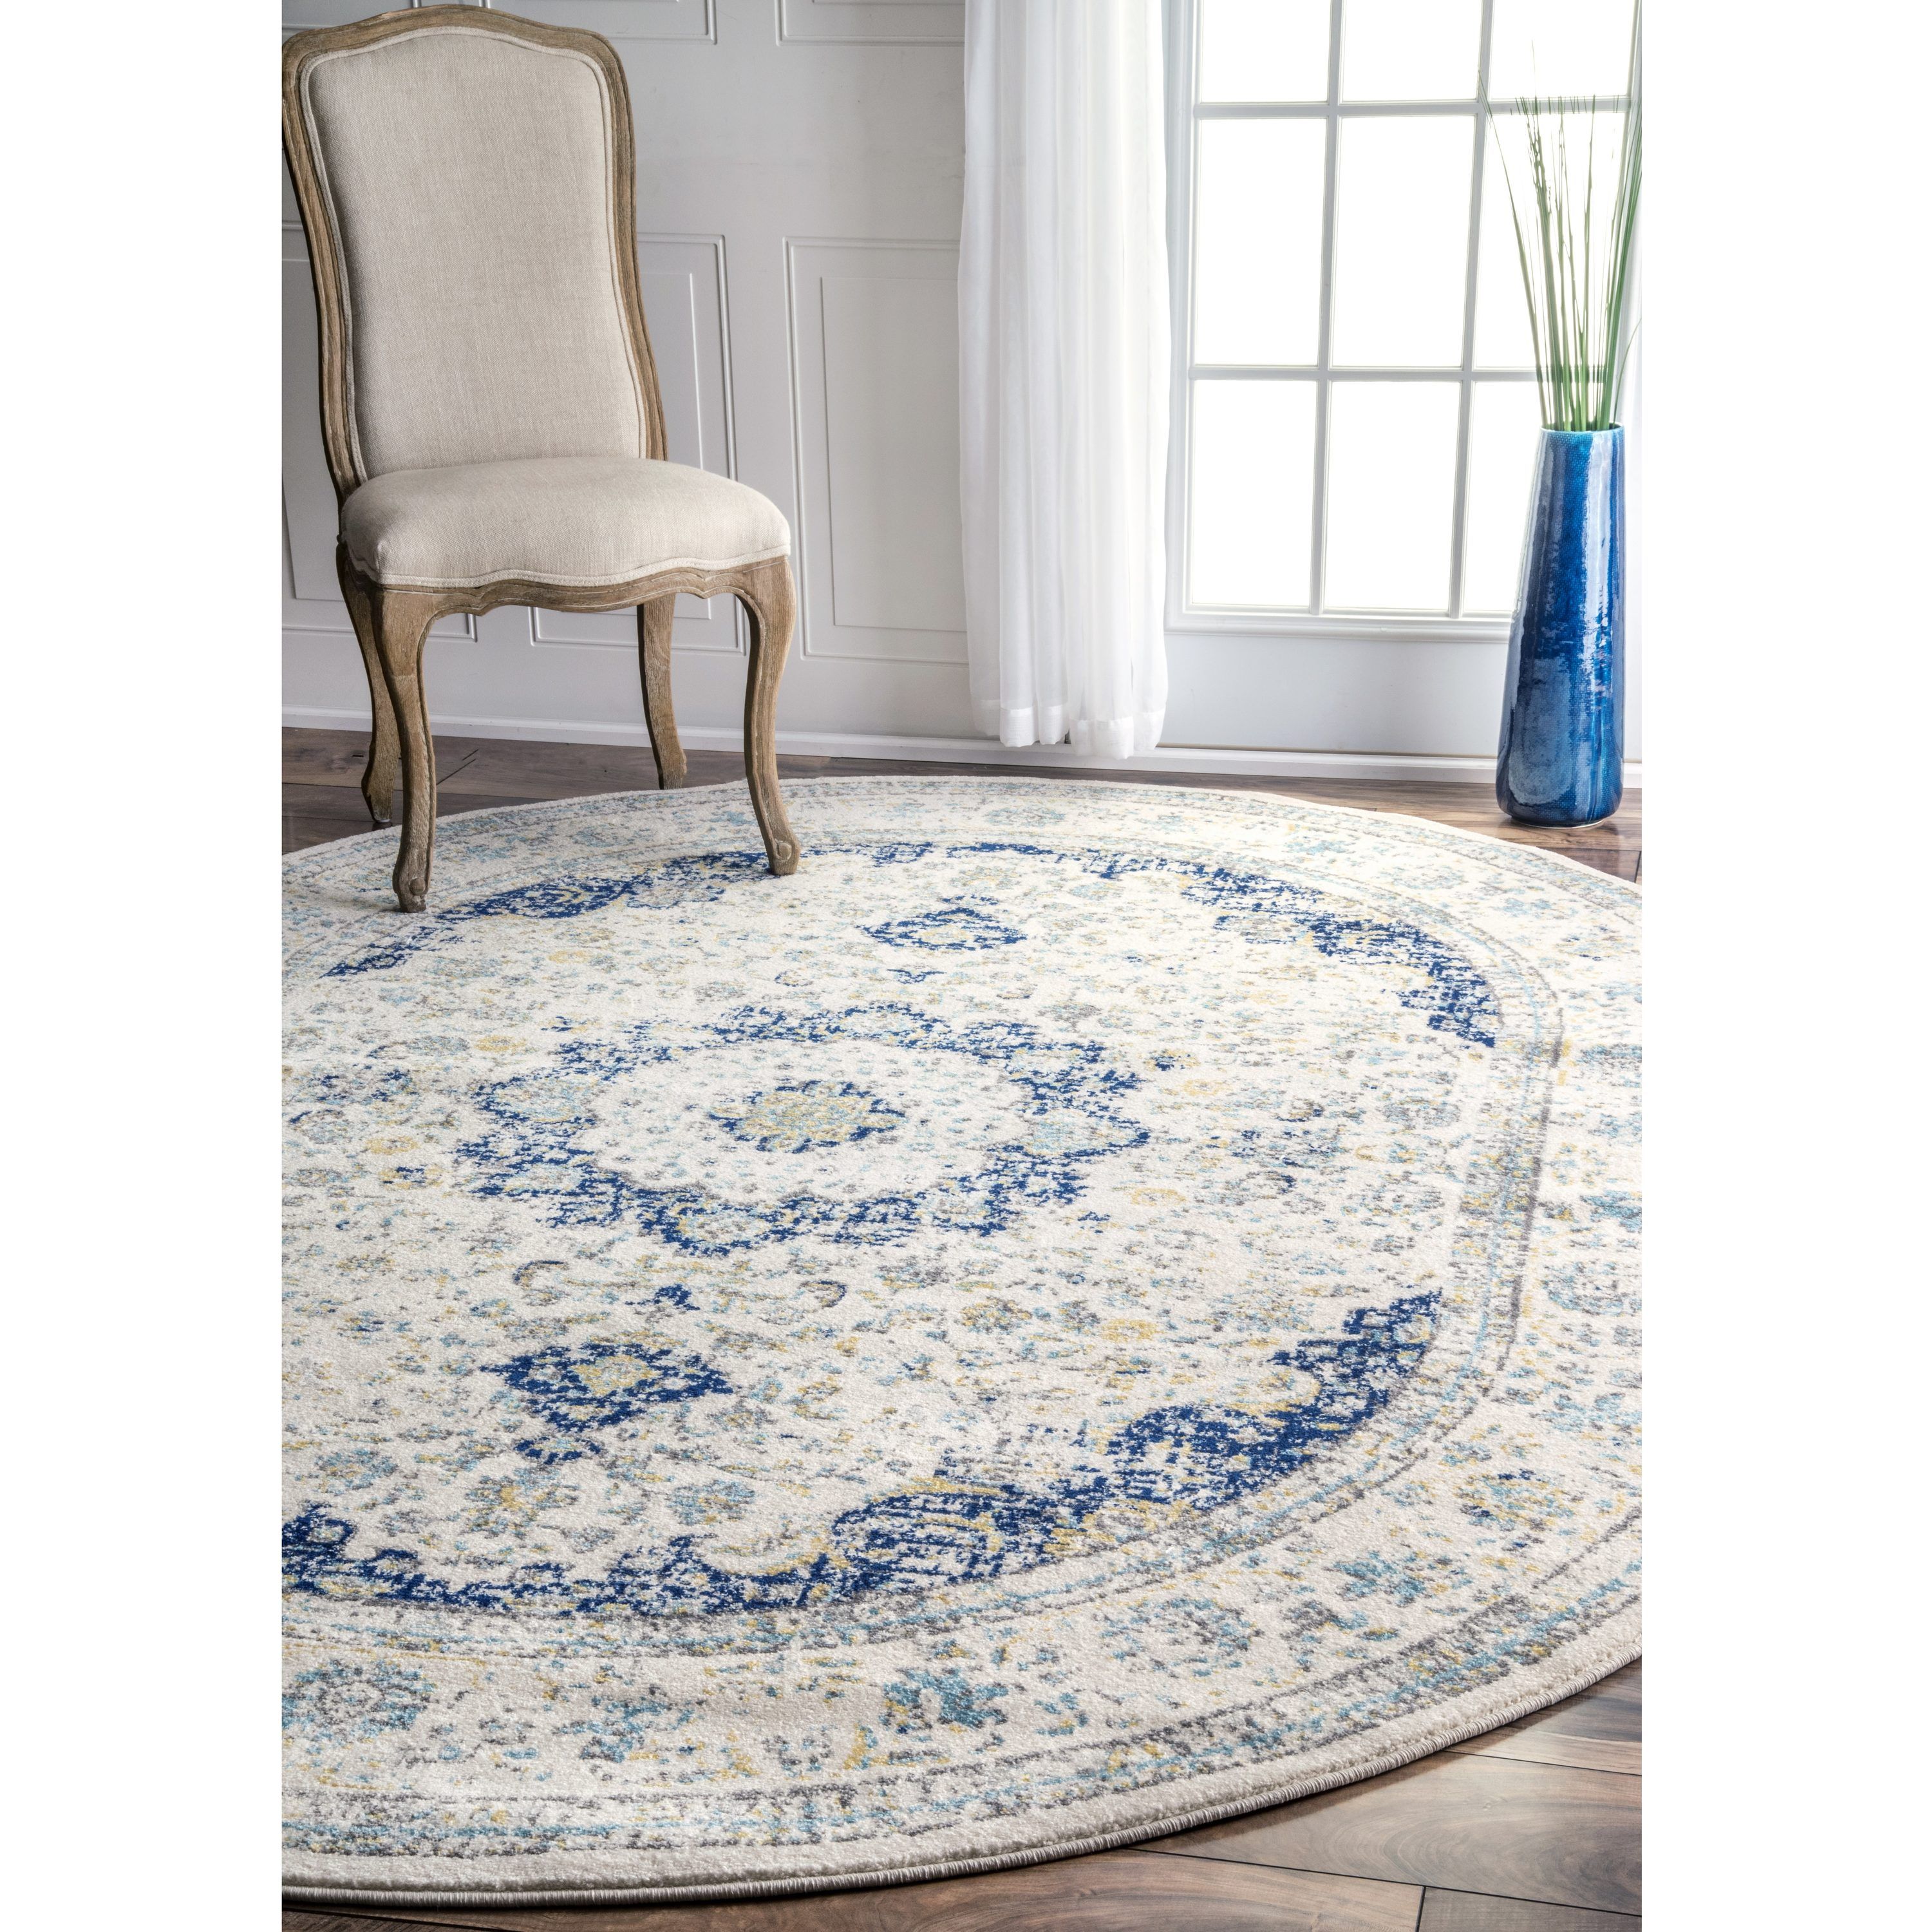 Nuloom 6 X 9 Blue Oval Indoor Distressed/overdyed Area Rug In The Rugs  Department At Lowes Regarding Blue Oval Rugs (View 2 of 15)